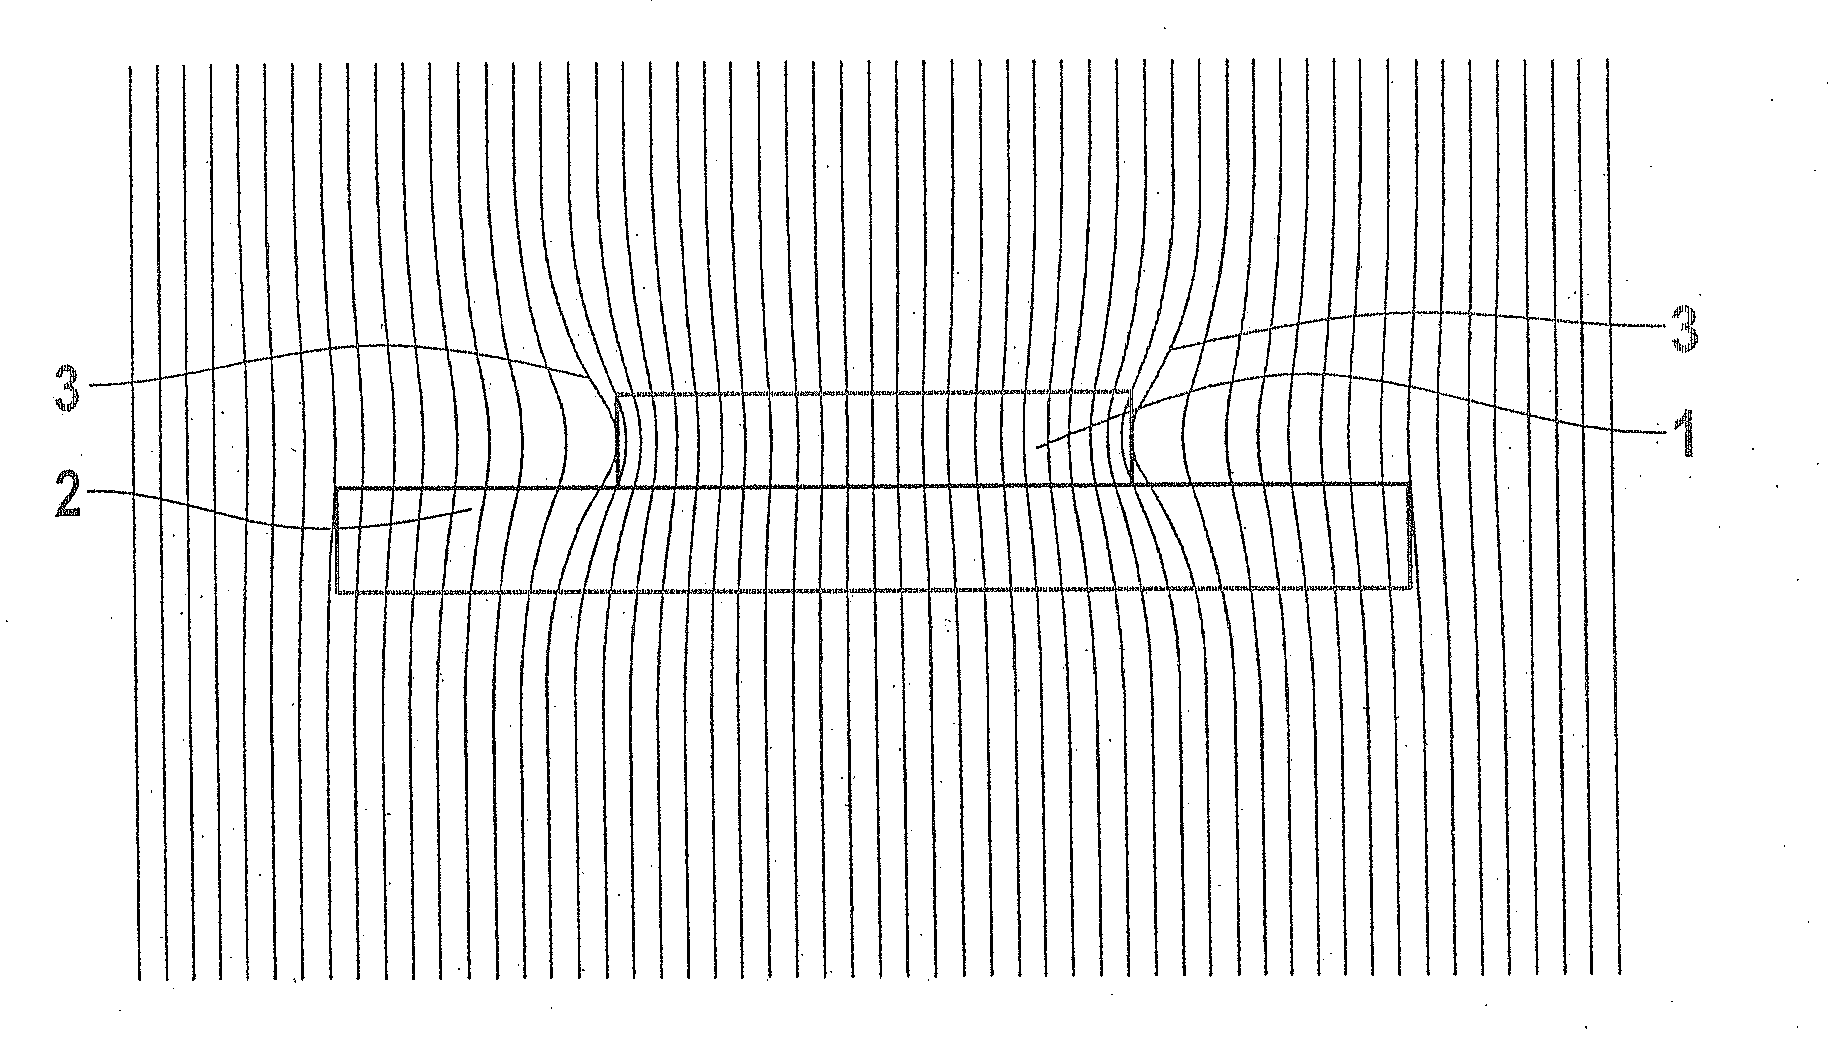 Magnetic field sensor array for measuring spatial components of a magnetic field